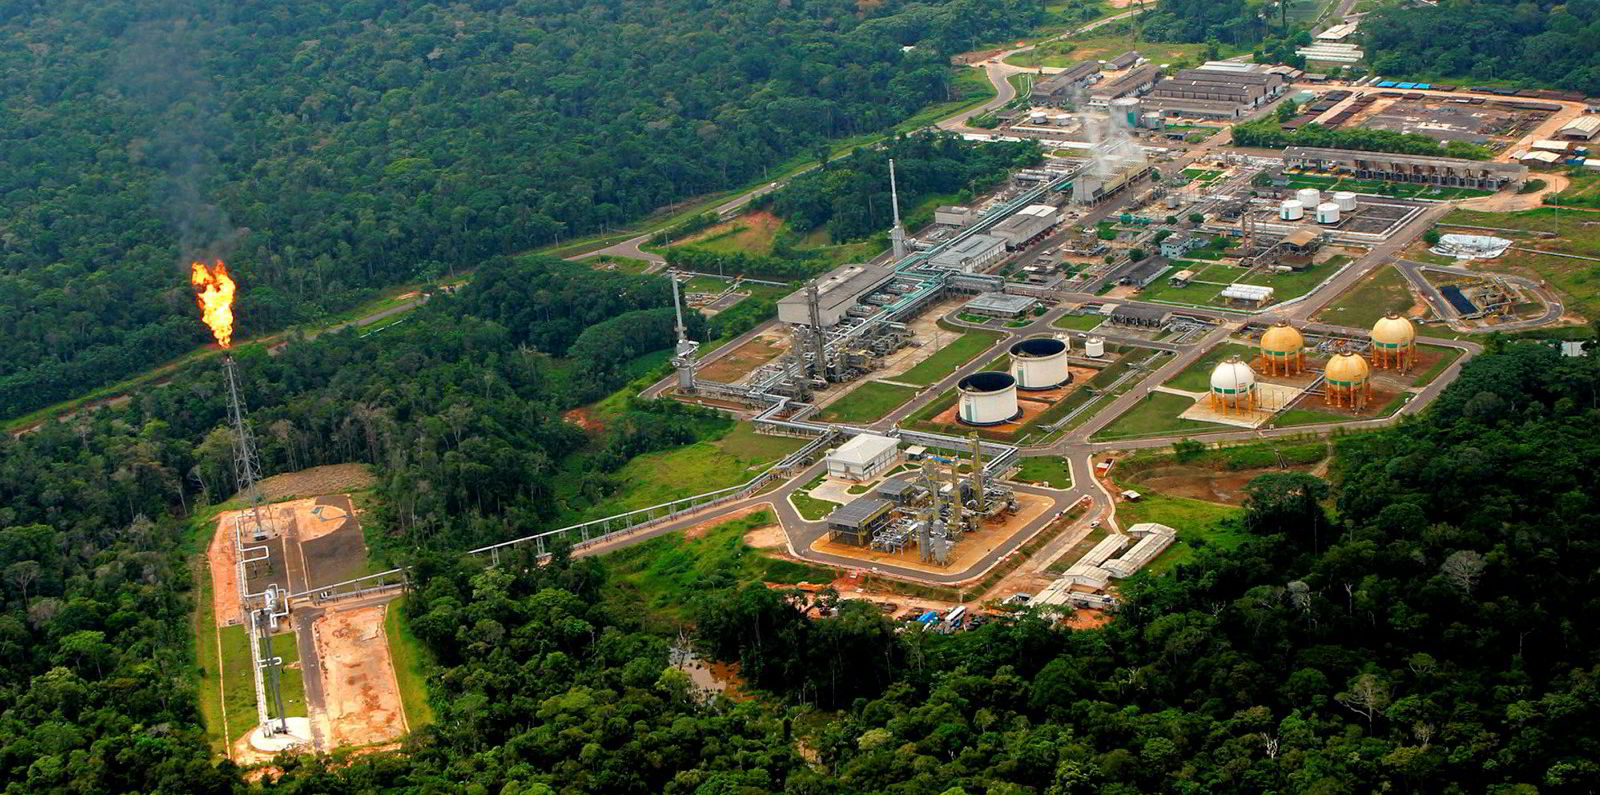 petrobras-in-talks-over-onshore-gas-cluster-sale-in-heart-of-amazon